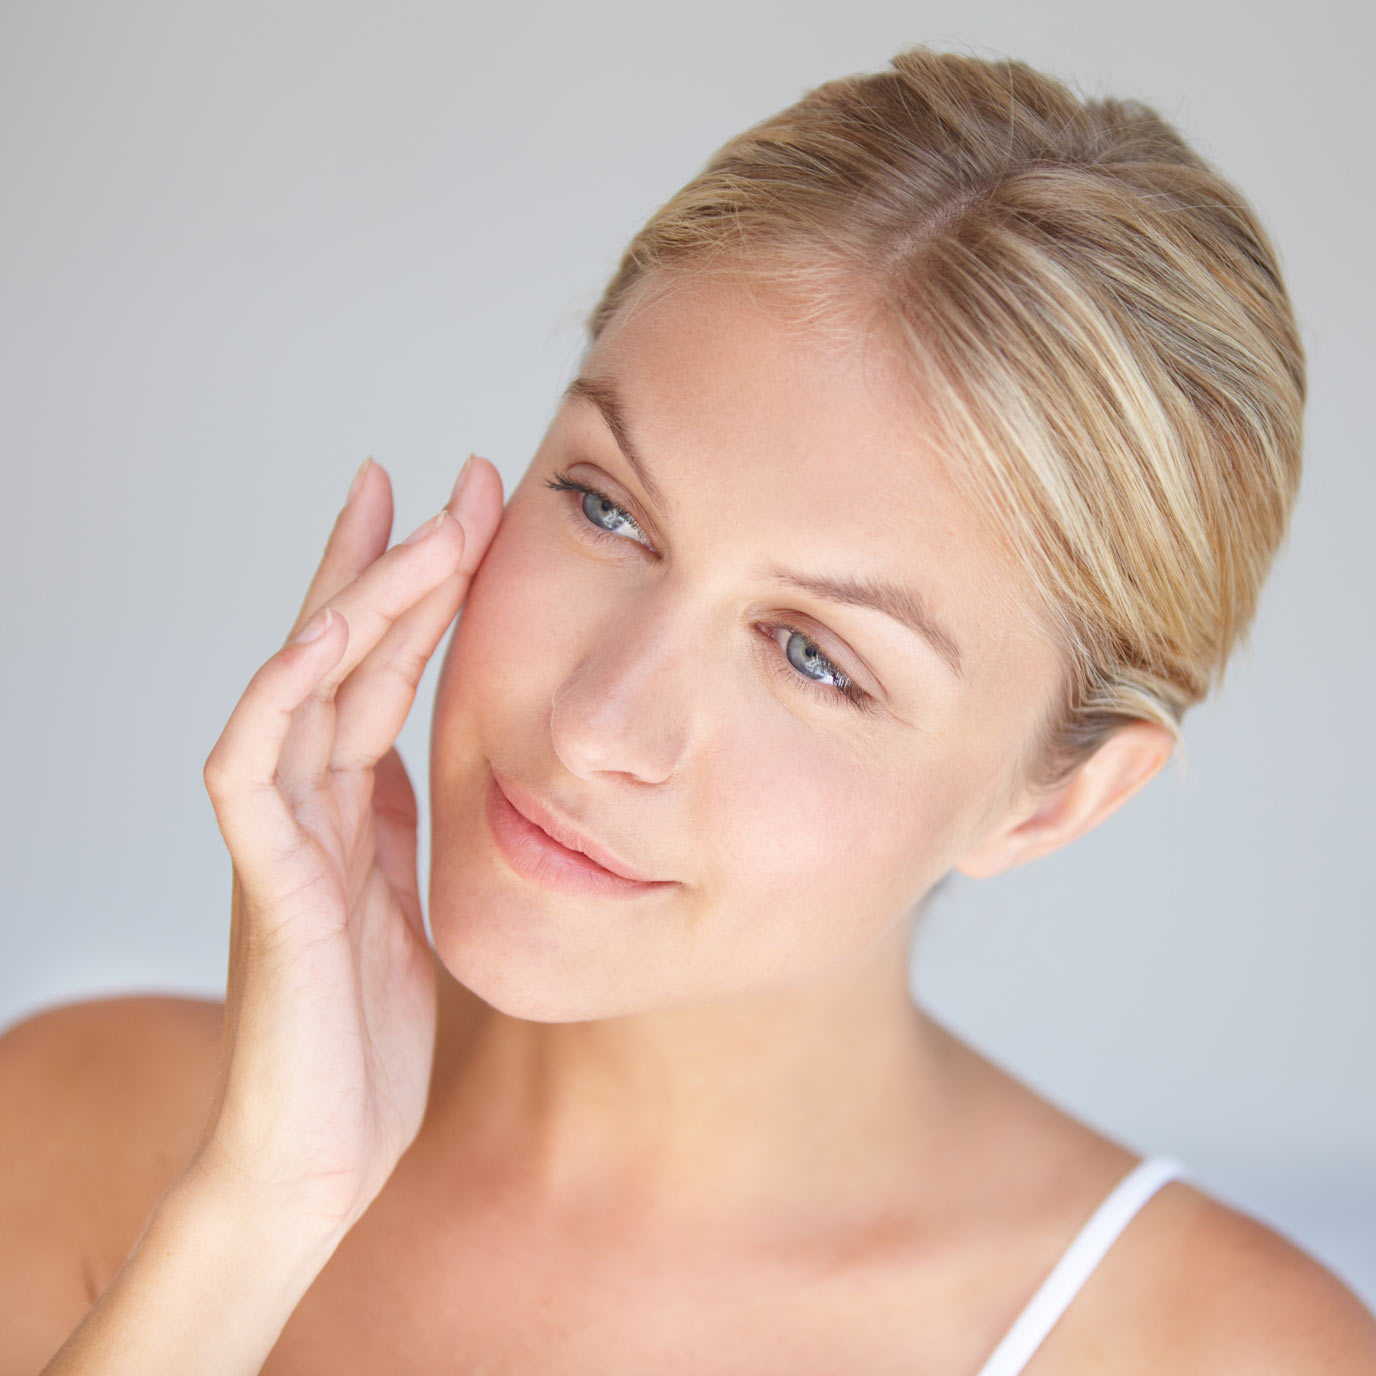 Read about our top natural anti-ageing tips